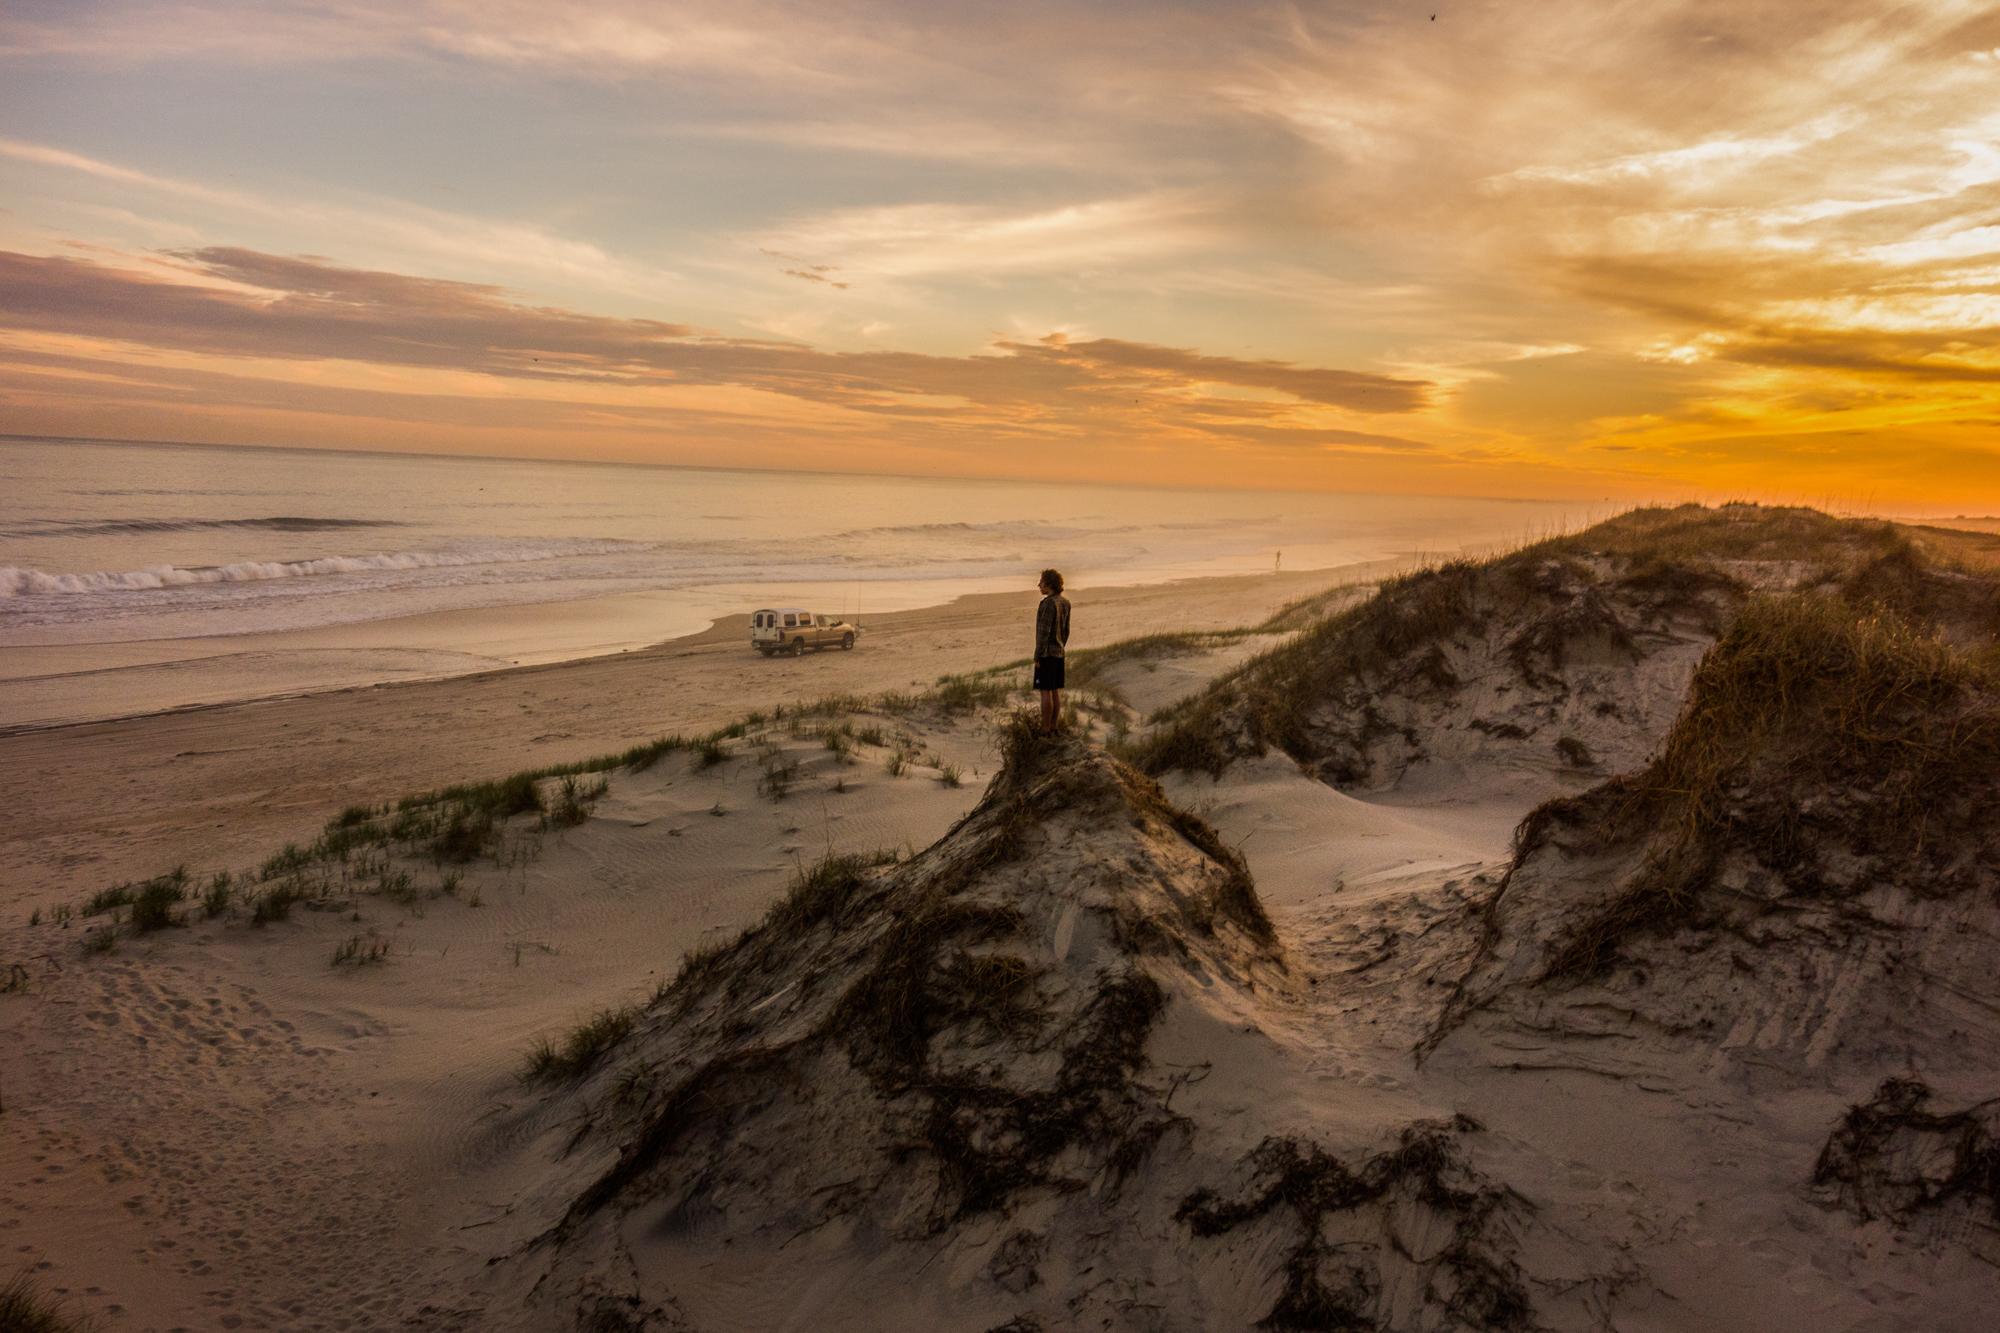 Shifting Sands - A network of sand dunes spans the Cape Hatteras National Seashore in Frisco, North Carolina. The...